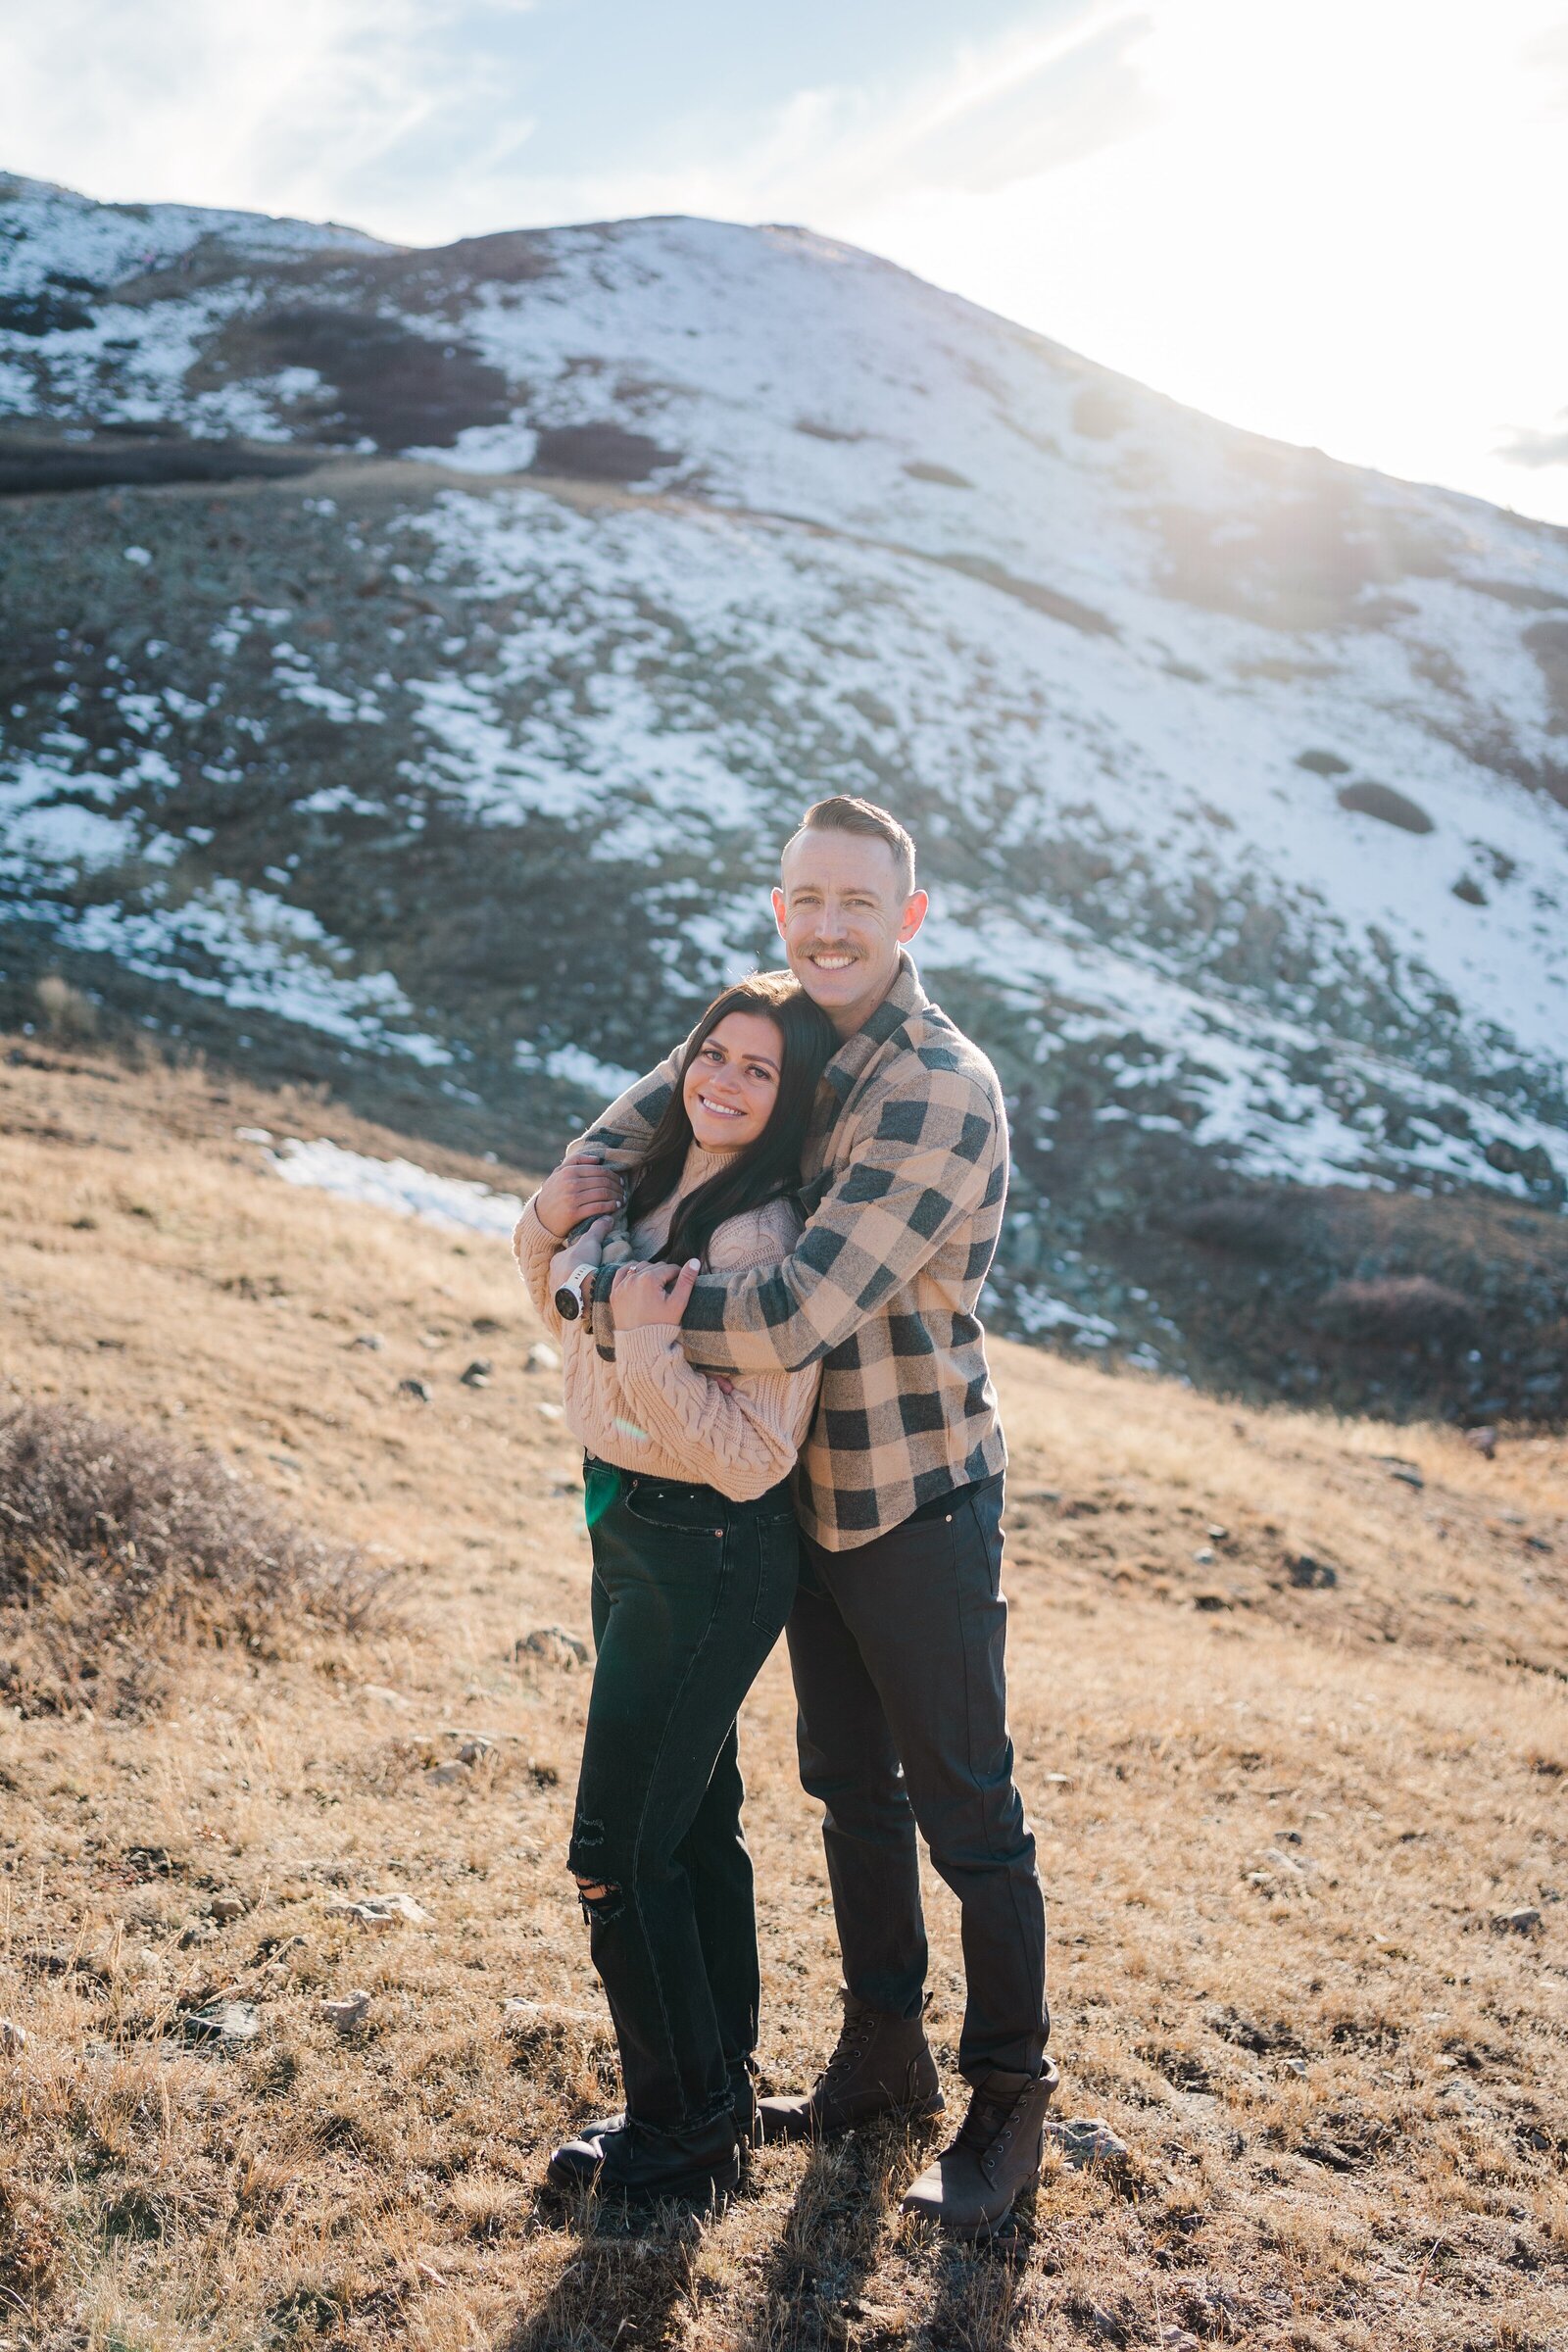 Celebrate your engagement amidst Colorado's stunning natural scenery with Samantha Immer Photography's customized and personalized approach. Our candid and creative photography will capture your love story.